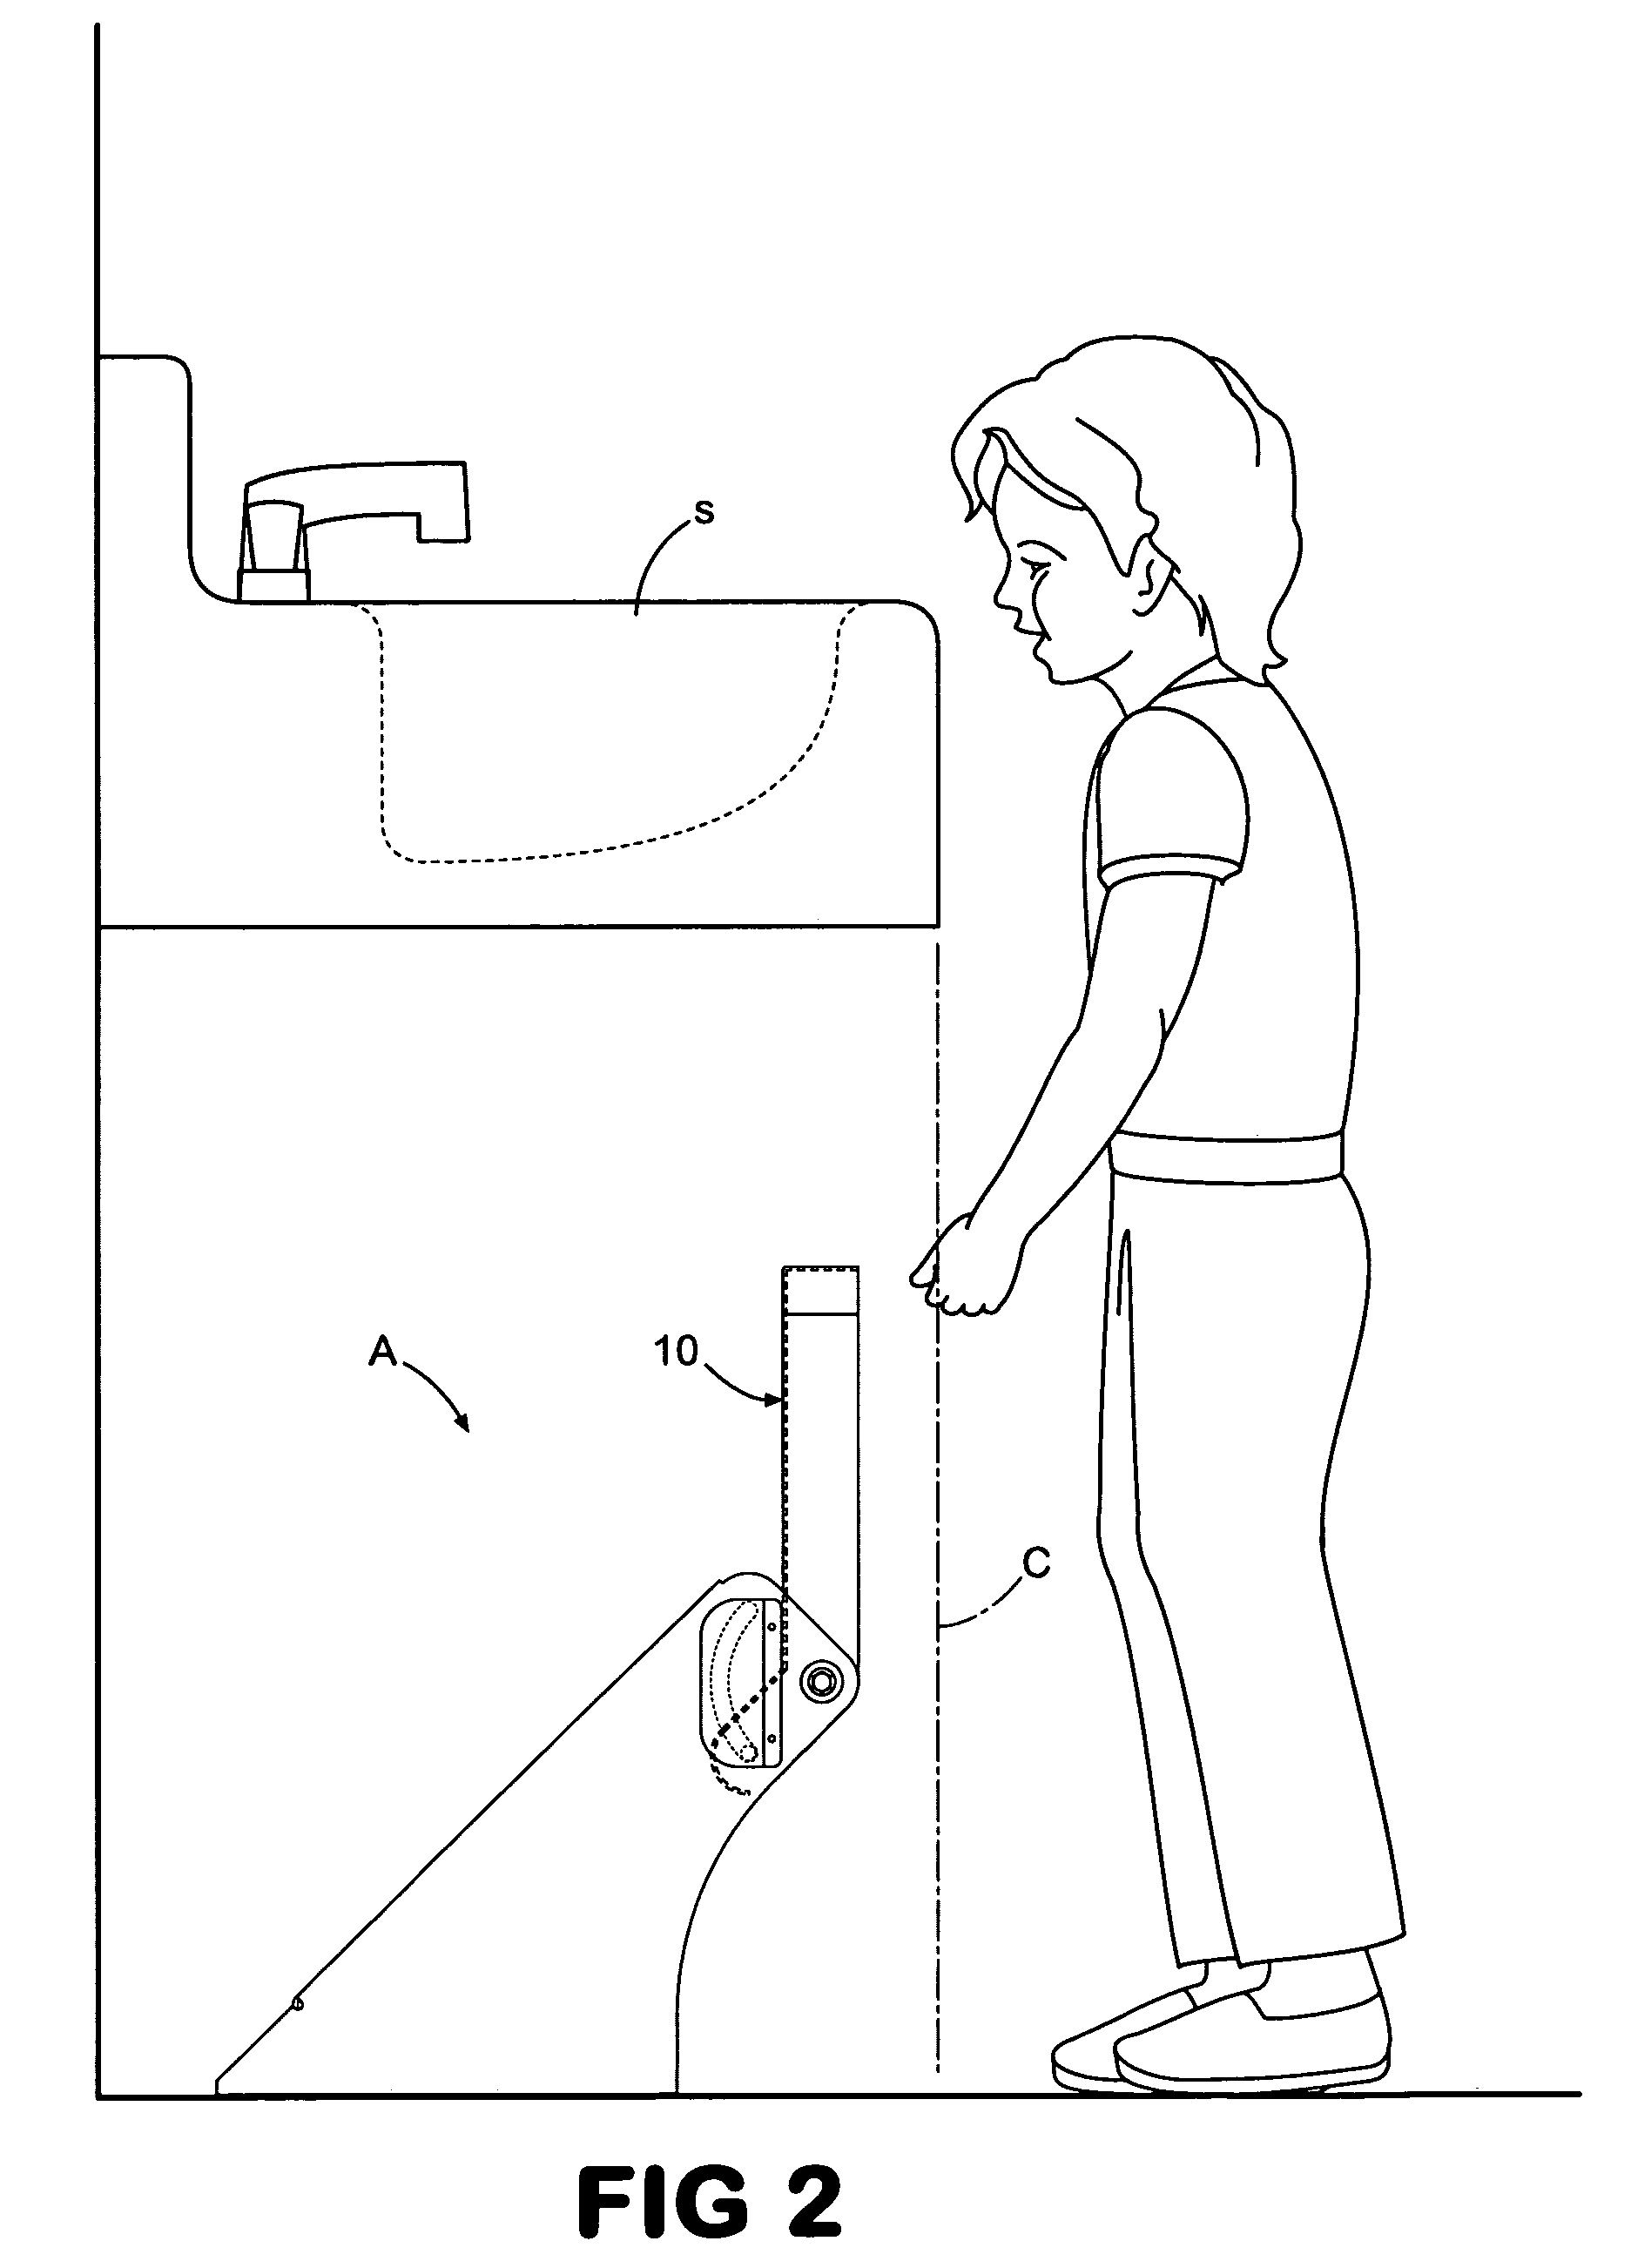 Sink access device for a public restroom